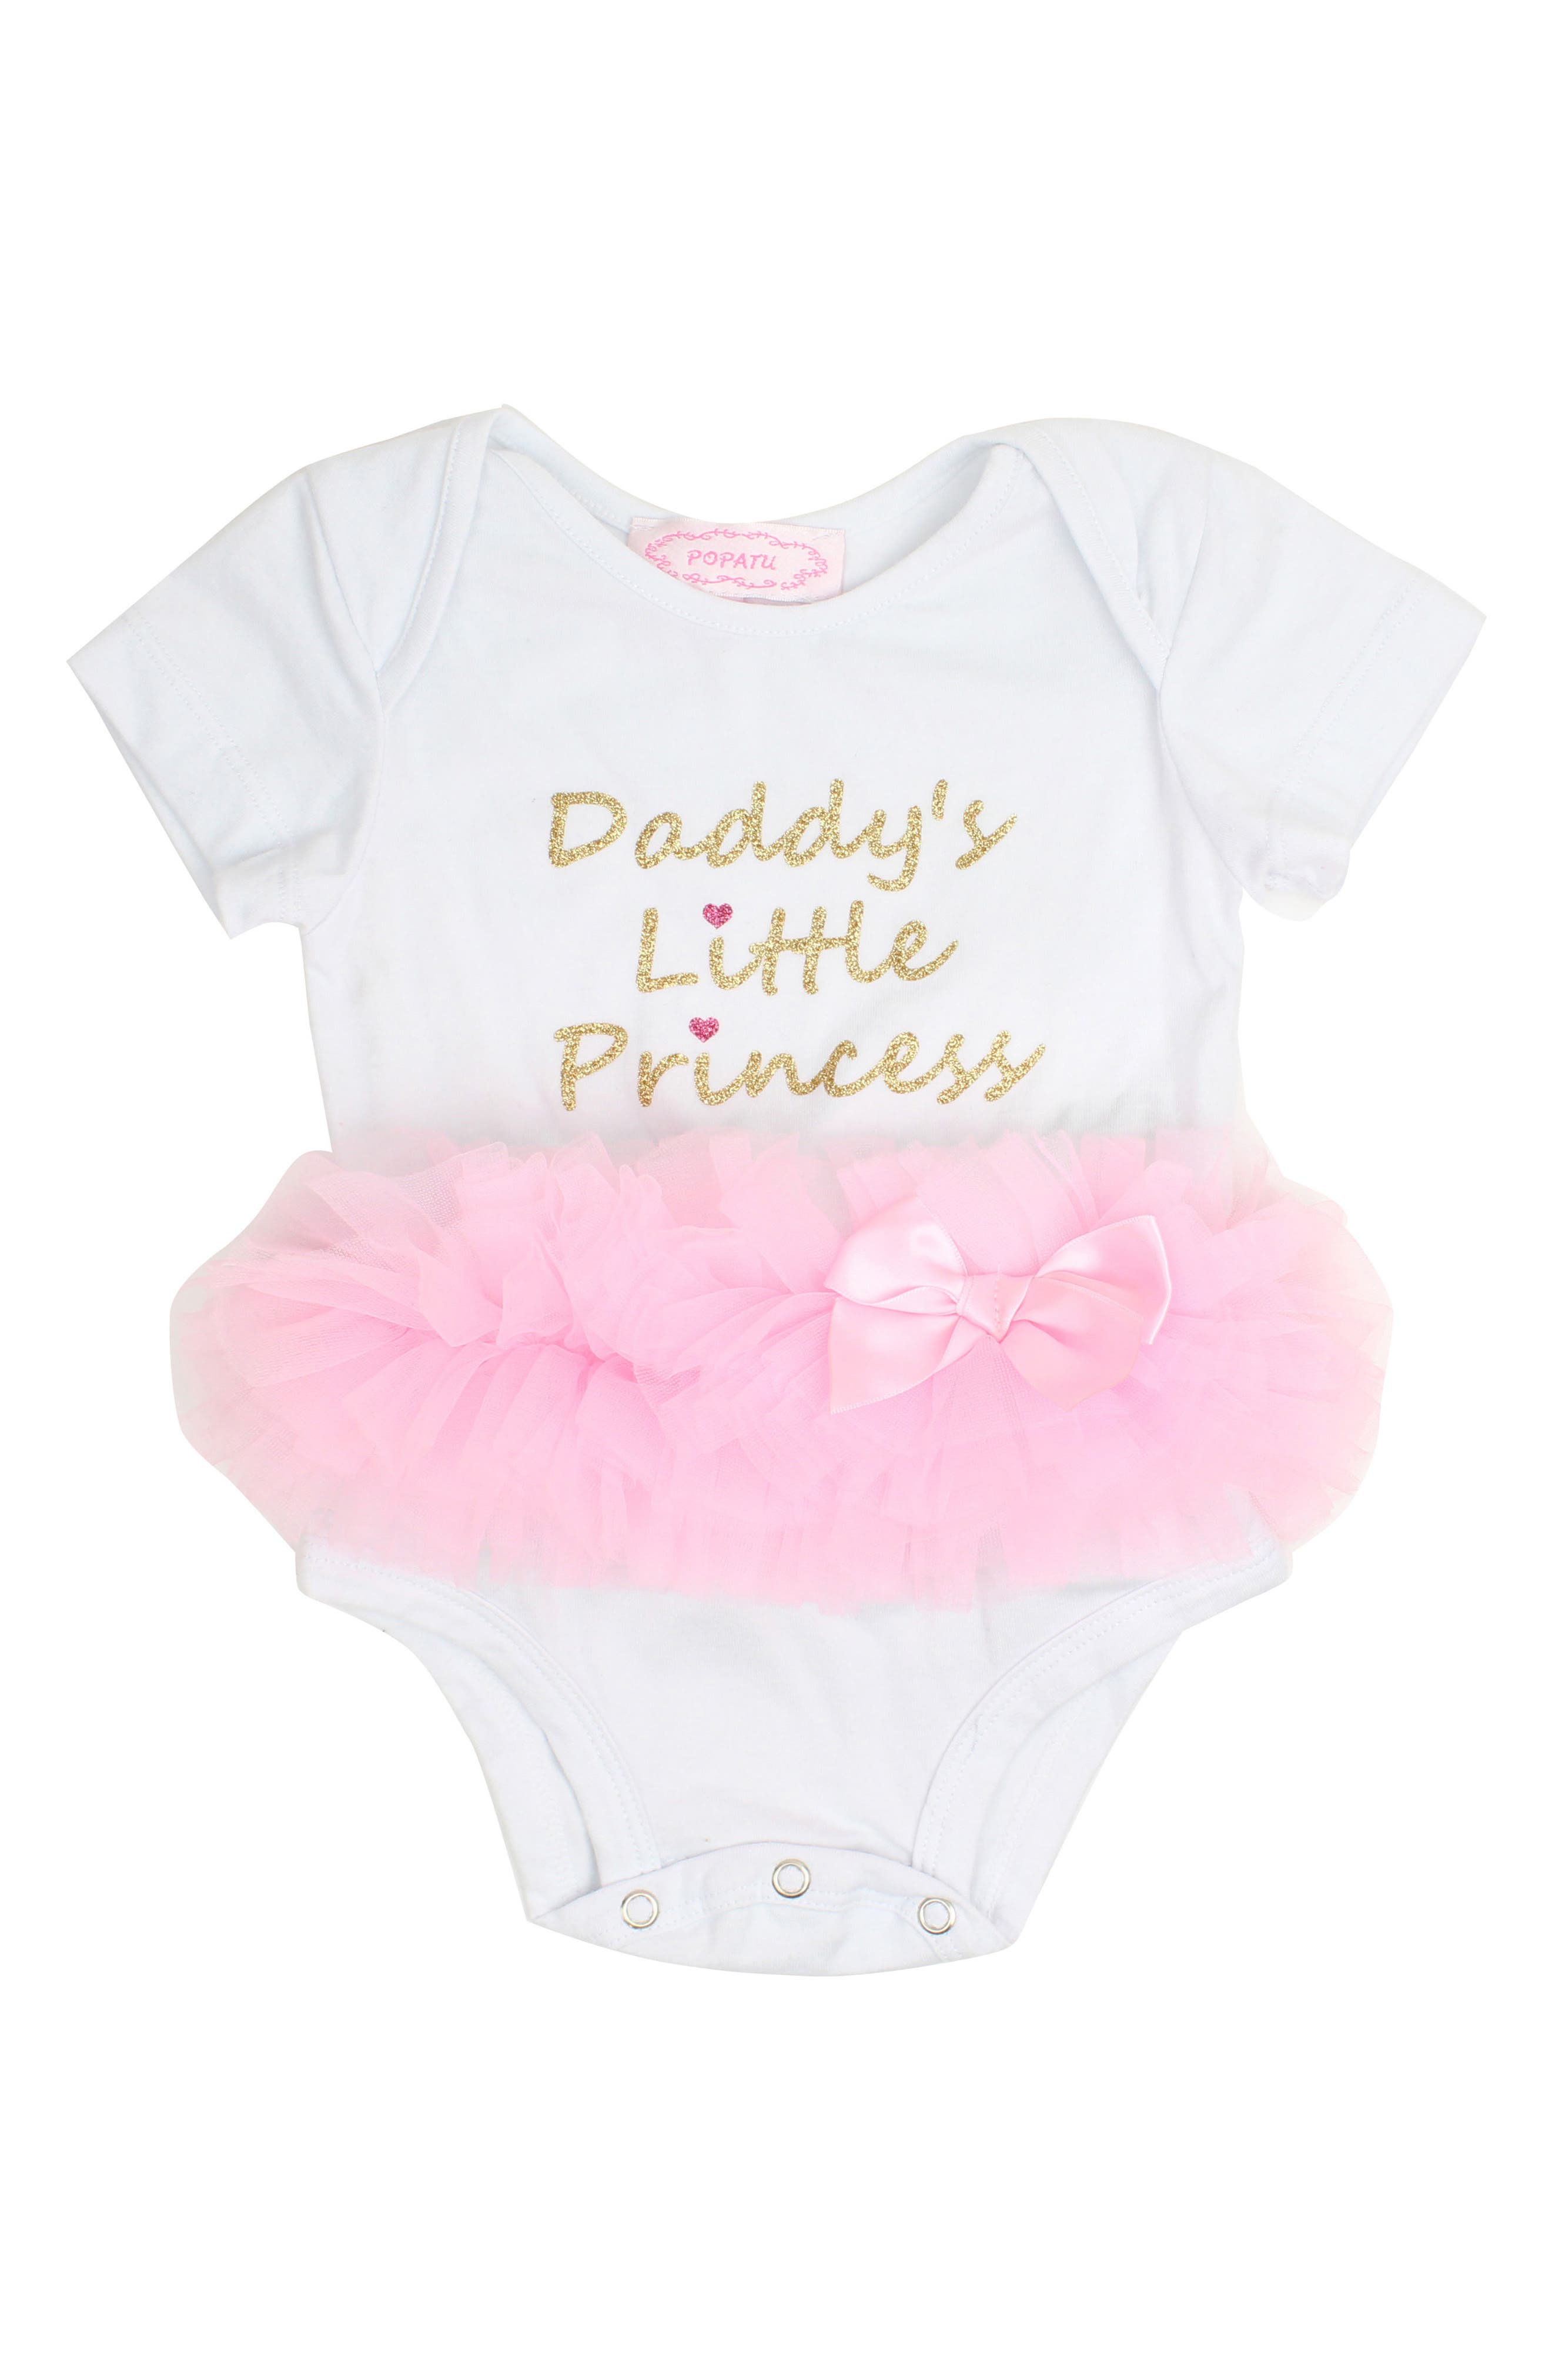 daddys little princess baby clothes